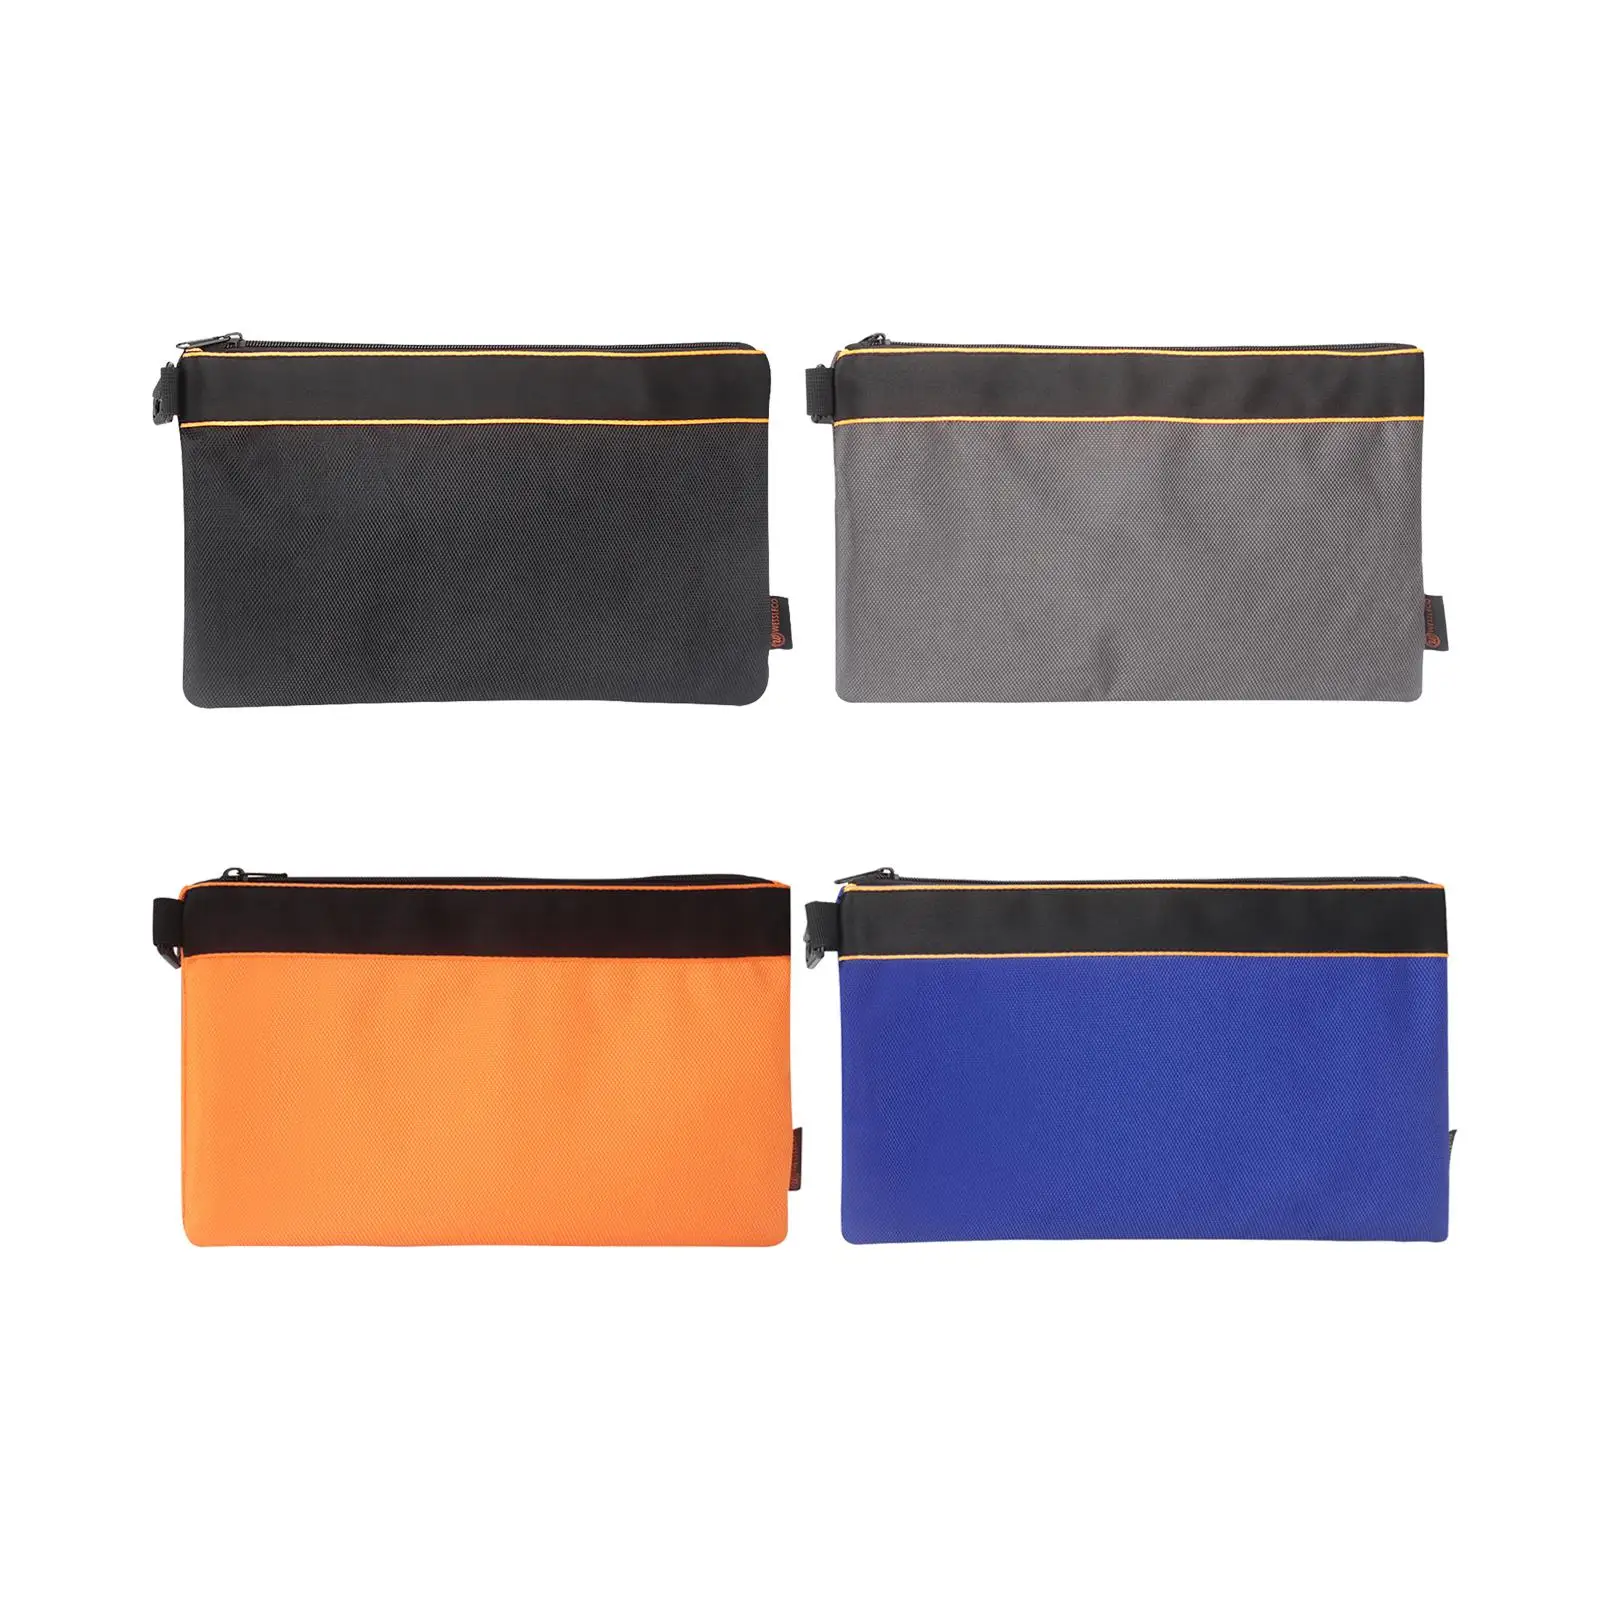 Multifunction Tool Bag Portable Tool Carry Bag Reusable Work Pouch Utility Pouch Tools Organizer Pouch Hardware Storage Bags